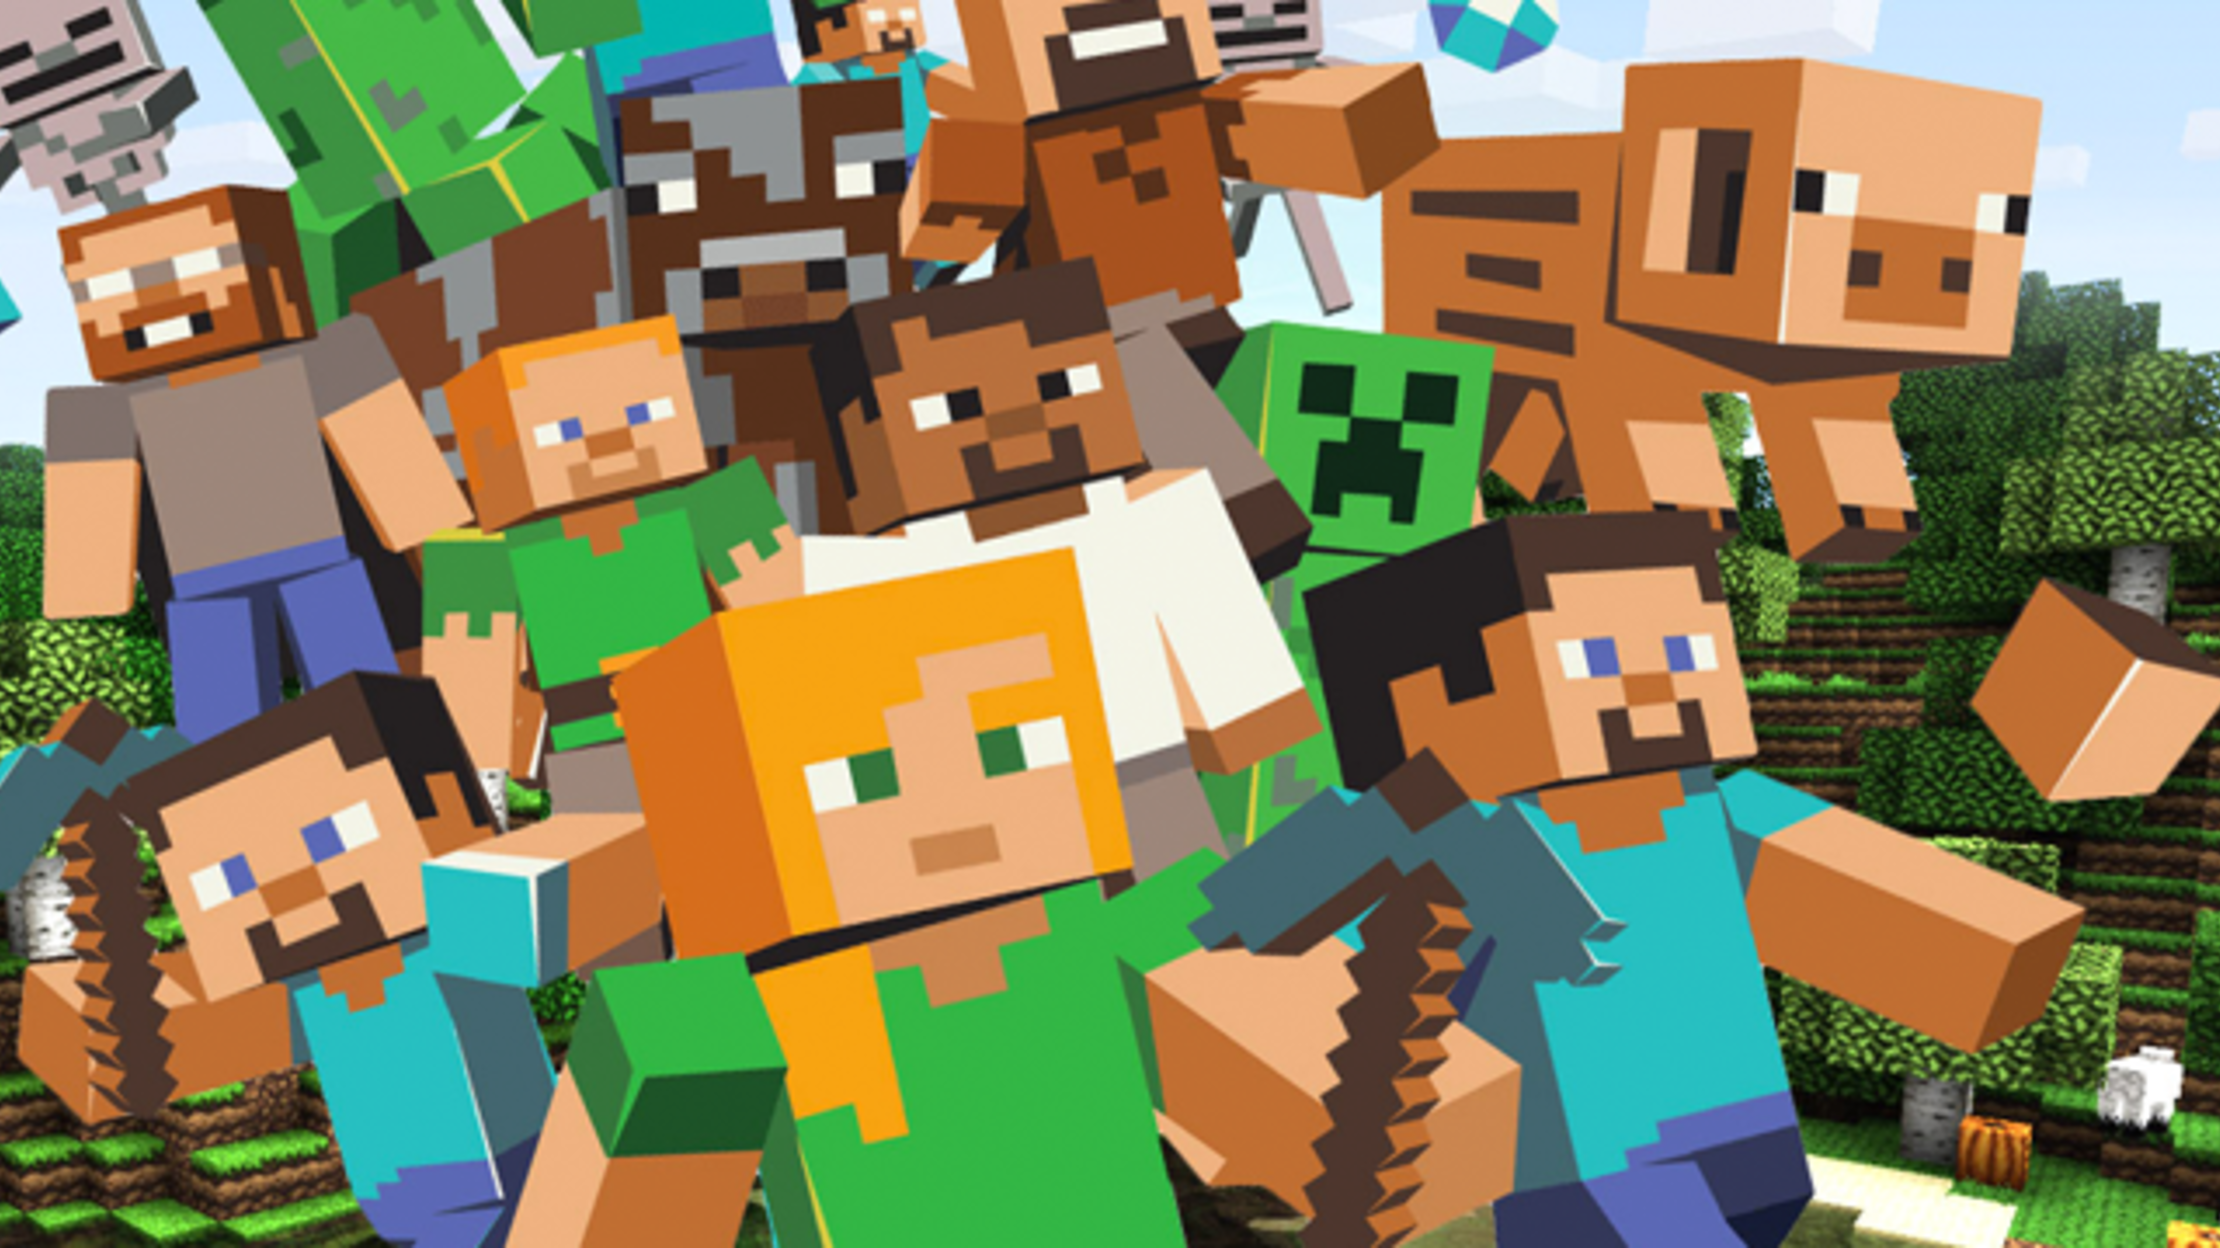 15 Fun Facts About 'Minecraft' | Mental Floss